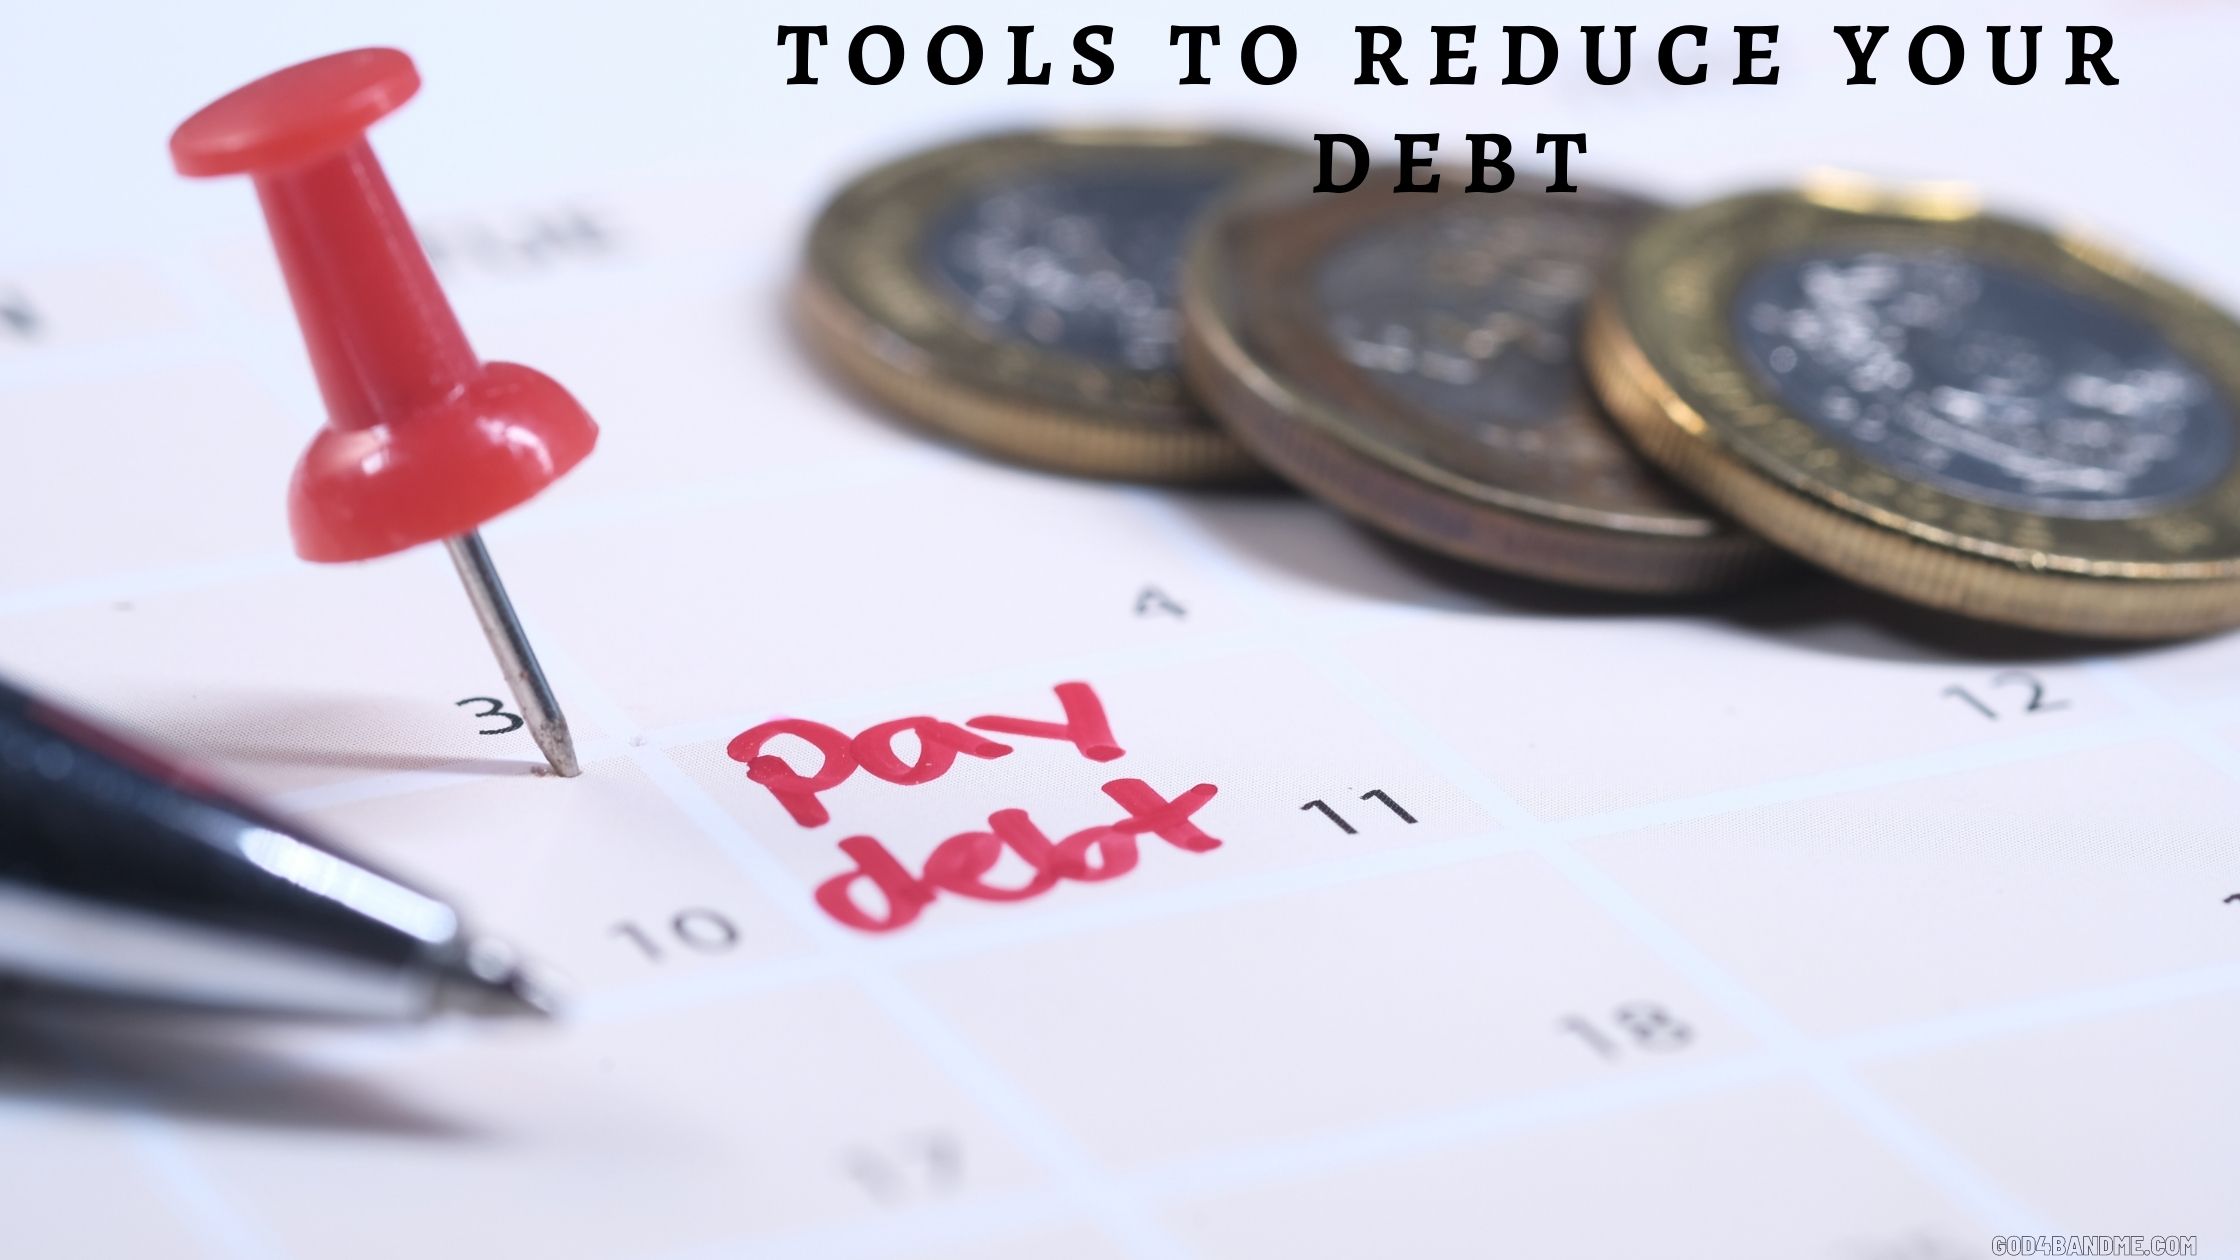 Tools to reduce your debt